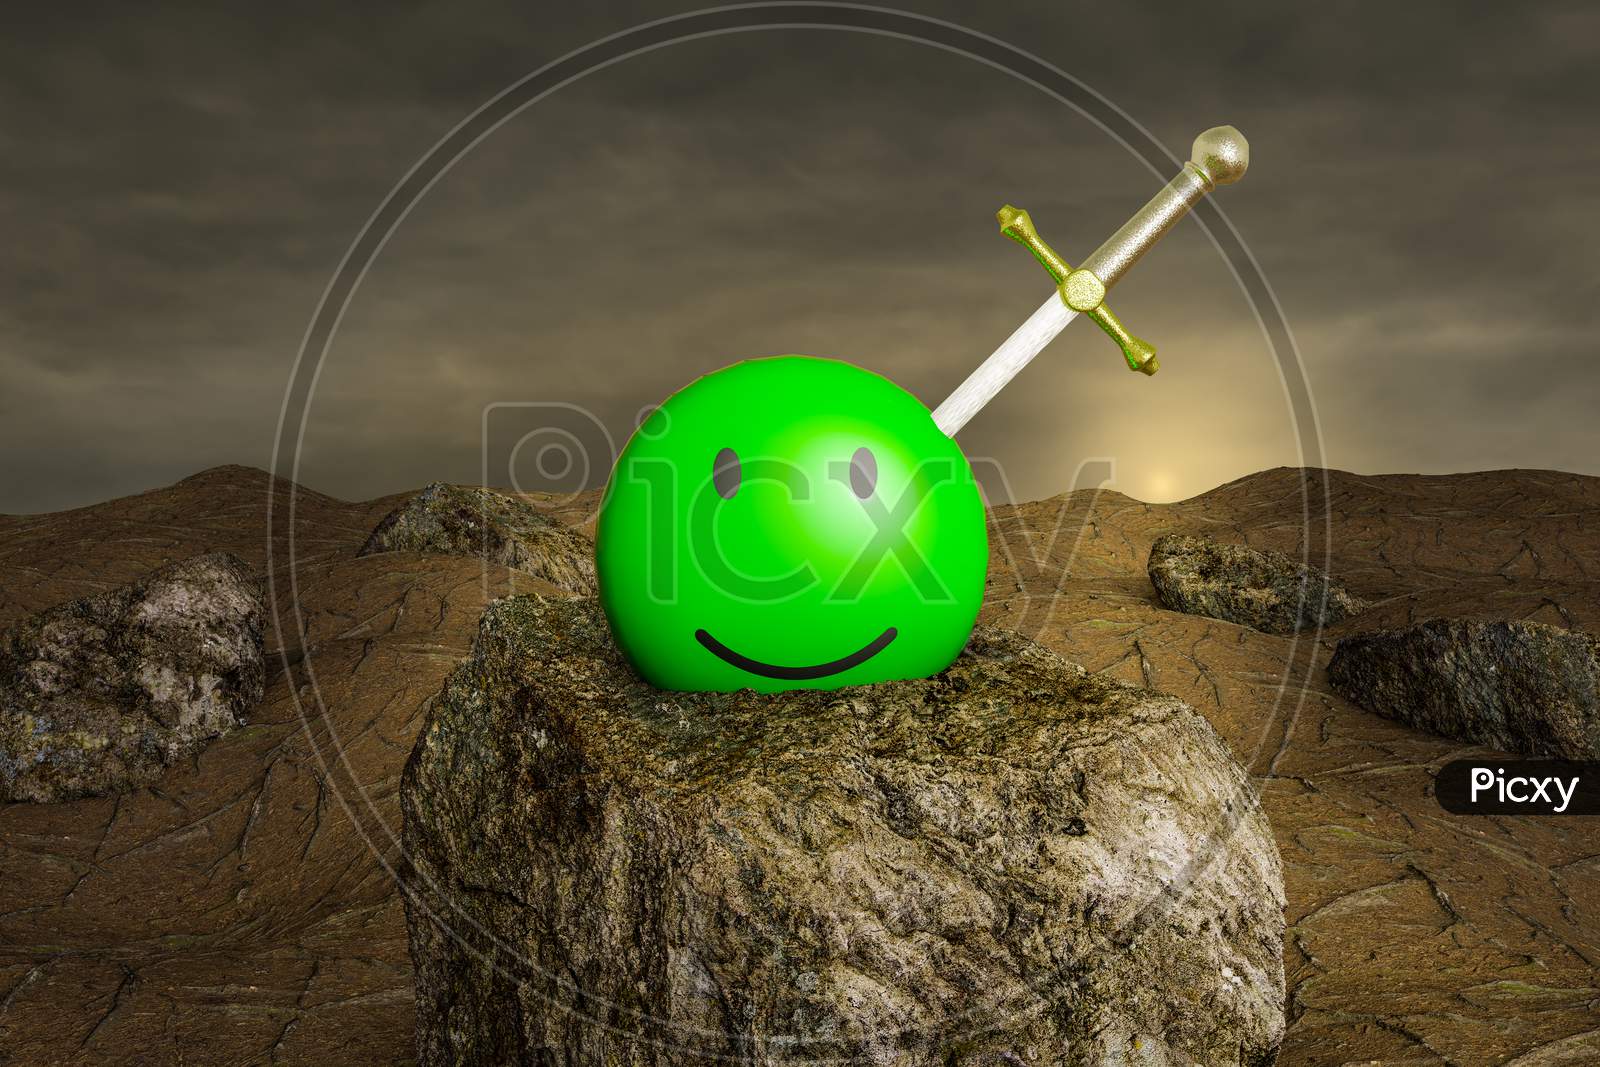 Excalibur In Green Smiling Emoticon Happy On Stone At Sunset Day. Customer Satisfaction Rating Or Service Experience Or Positive Feedback Survey Concept. 3D Illustration